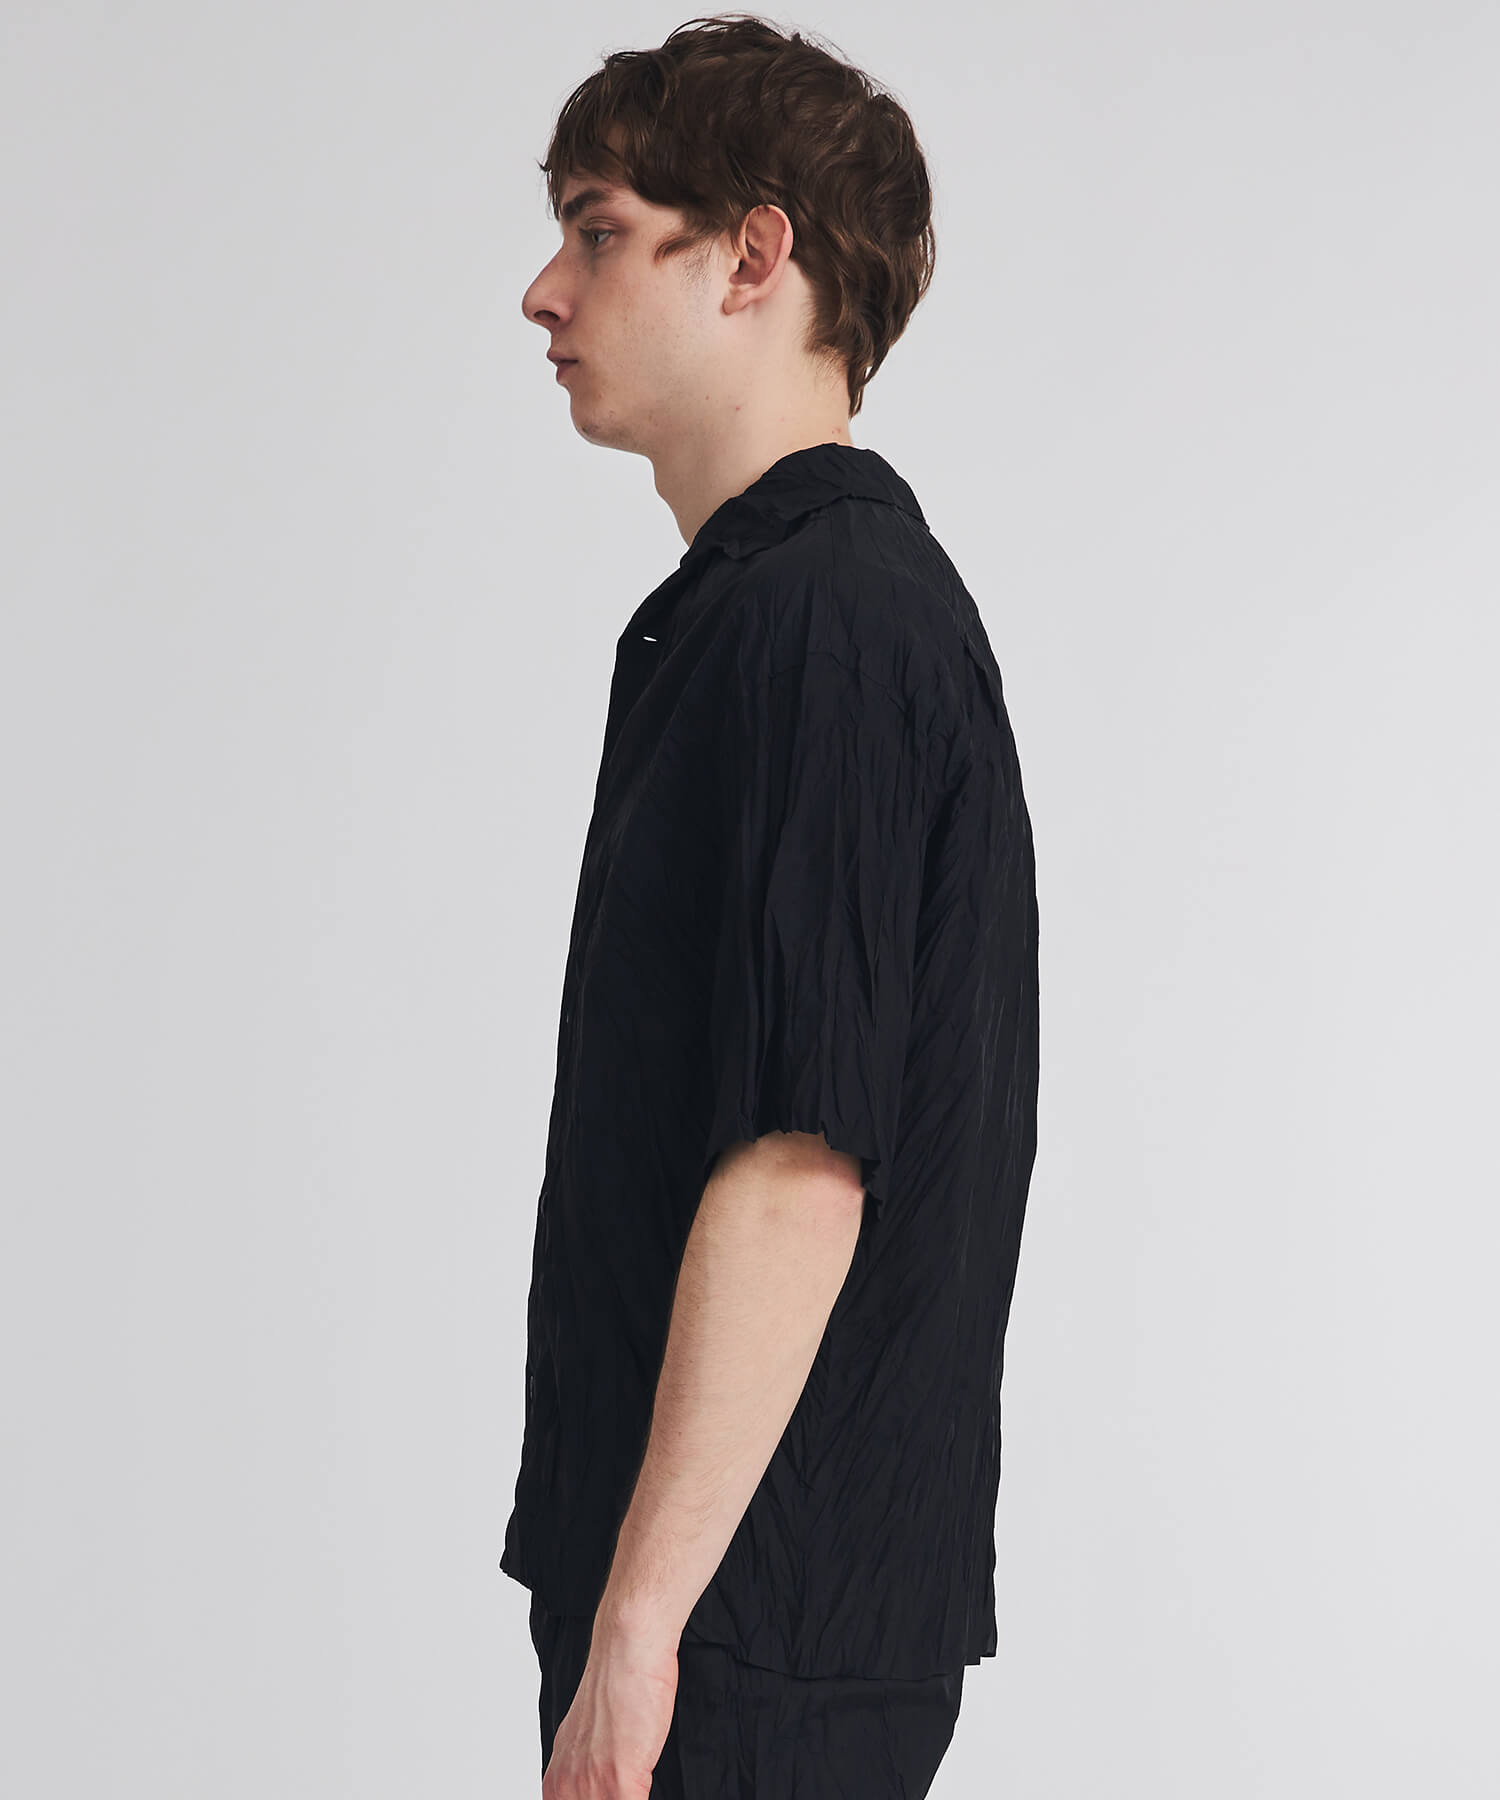 TH PRODUCTS - OPEN COLLAR SHIRT (BLK) | litnik.in.ua